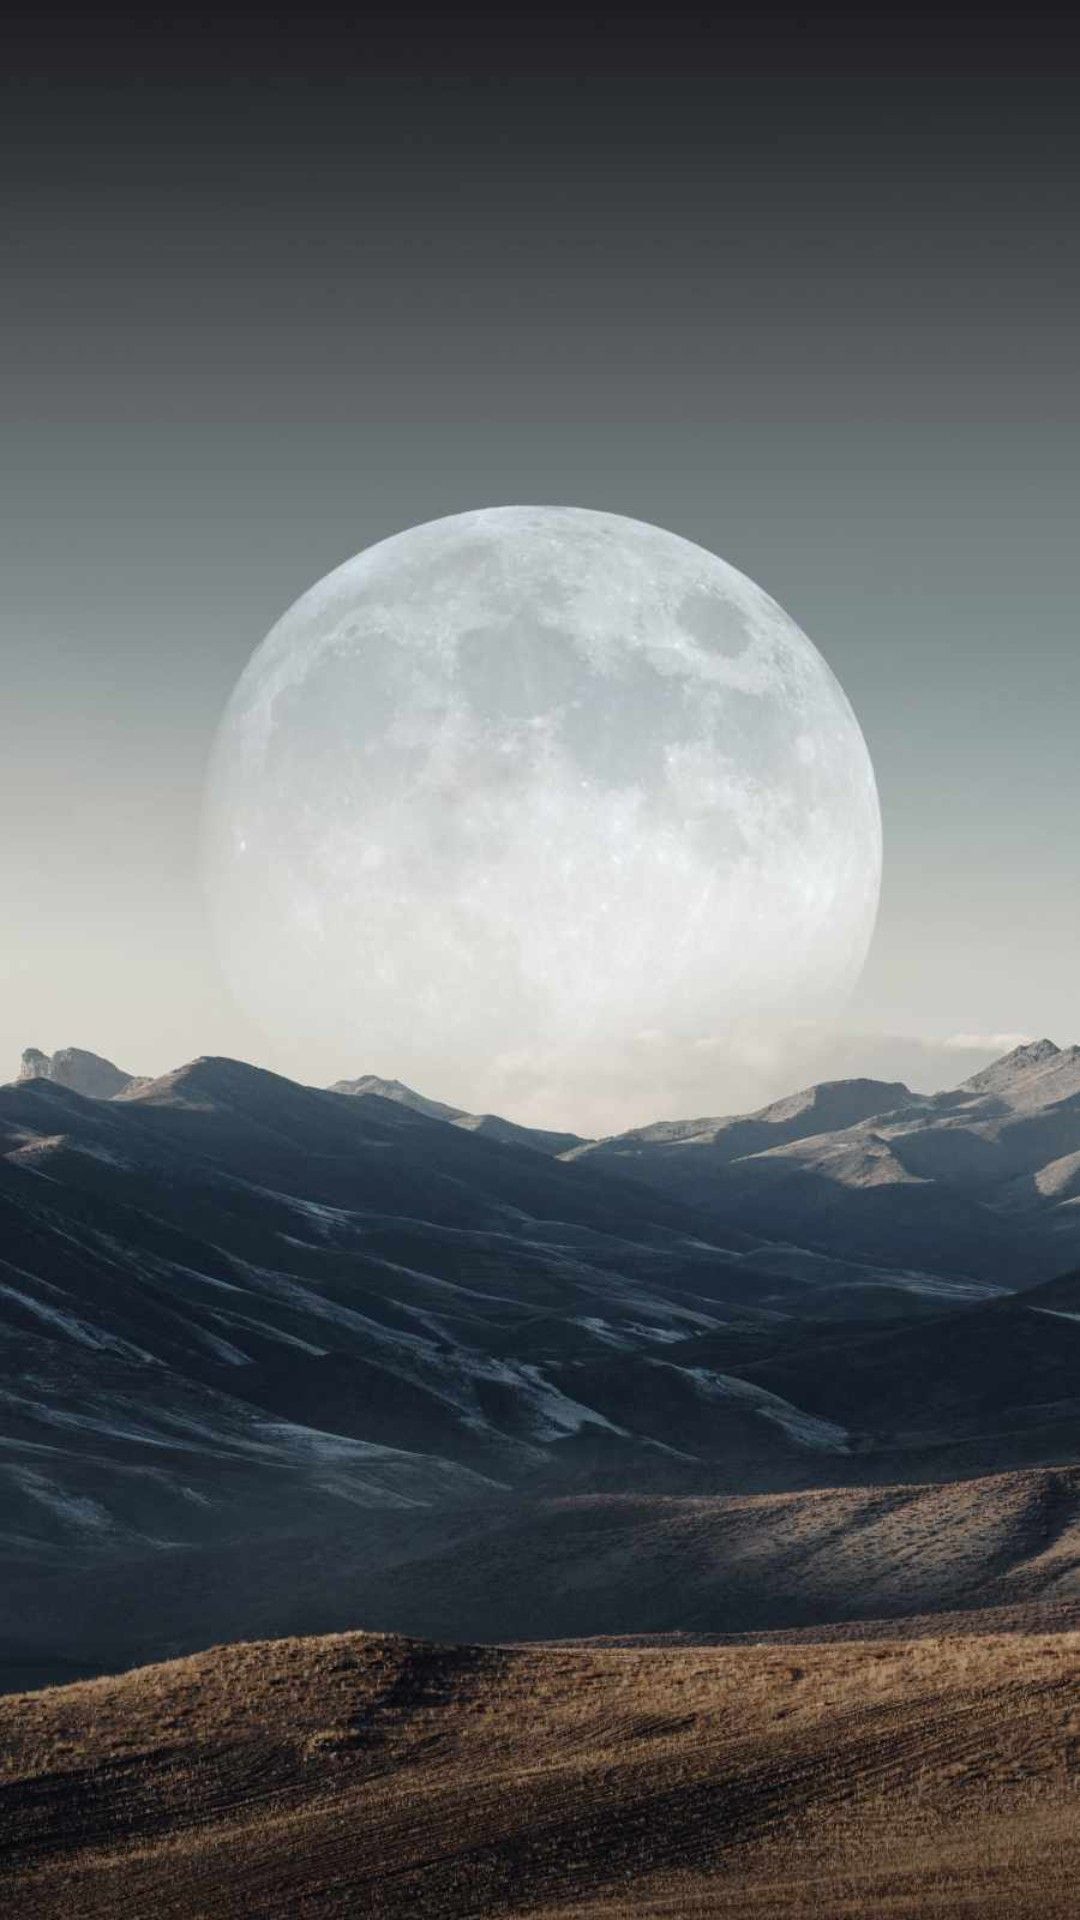 IPhone wallpaper of a full moon rising over a mountain range - Moon